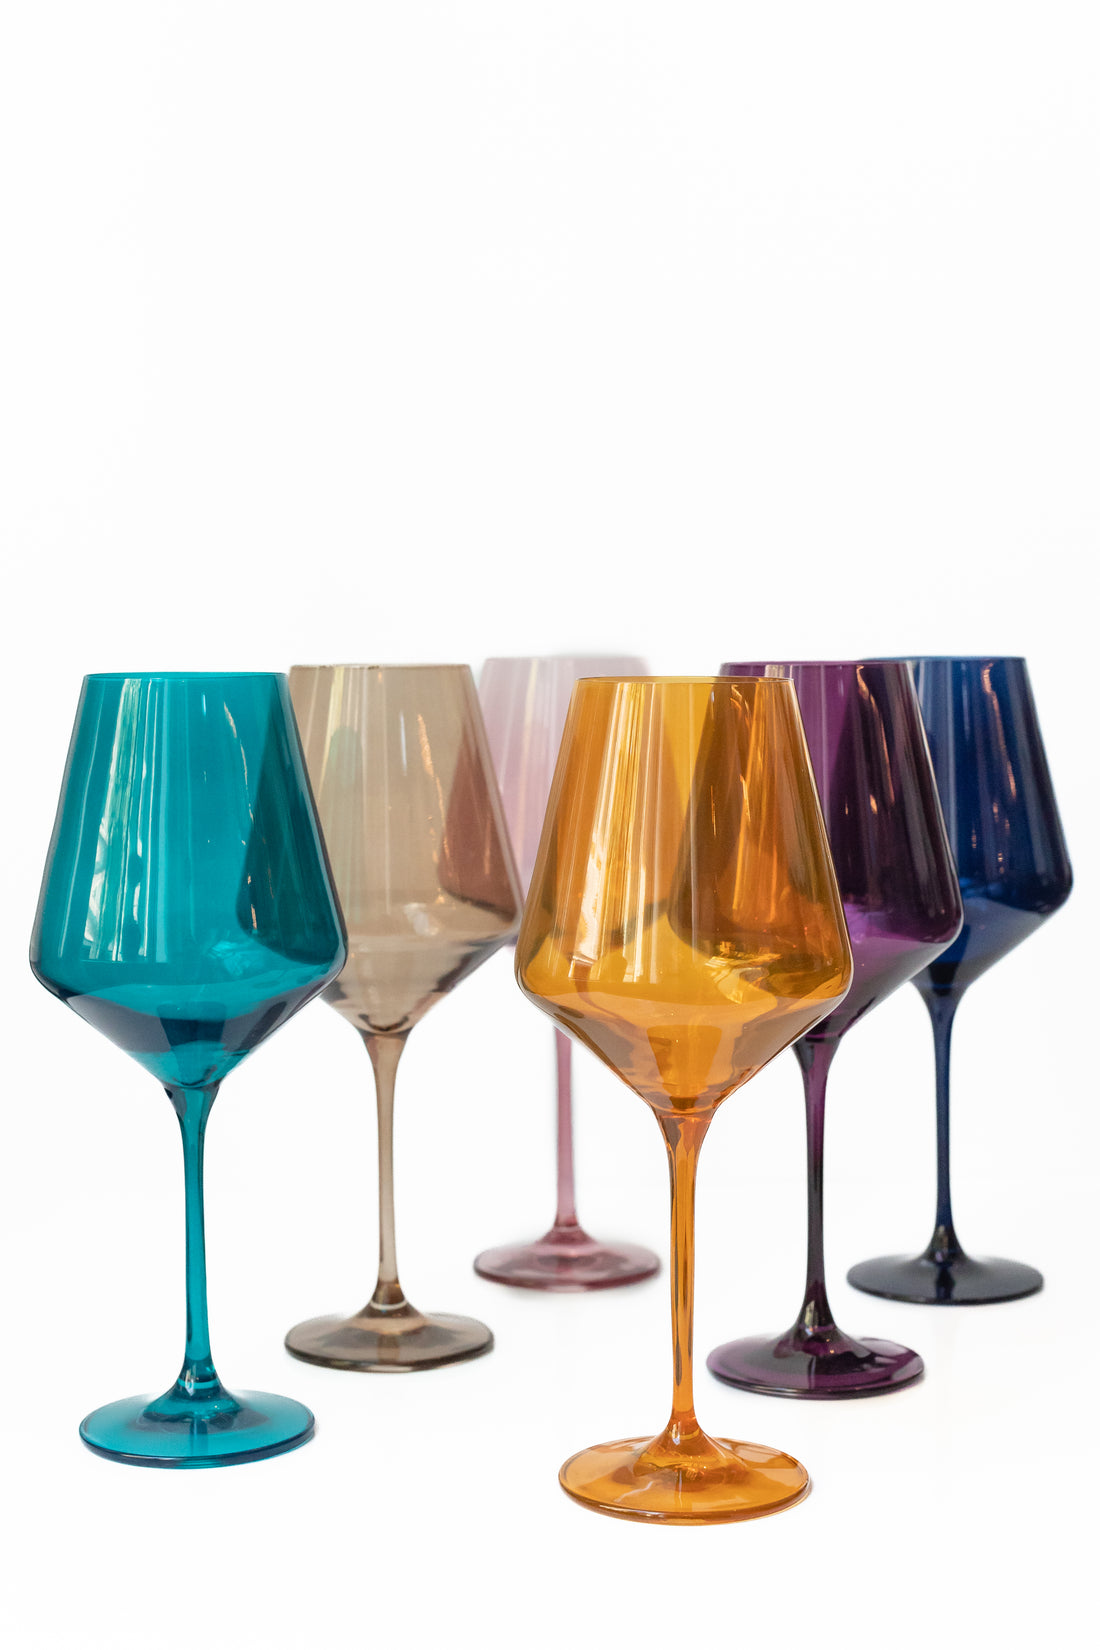 Estelle Colored Glass Set of 6 Stemless Wine Glasses in Pastel Mixed